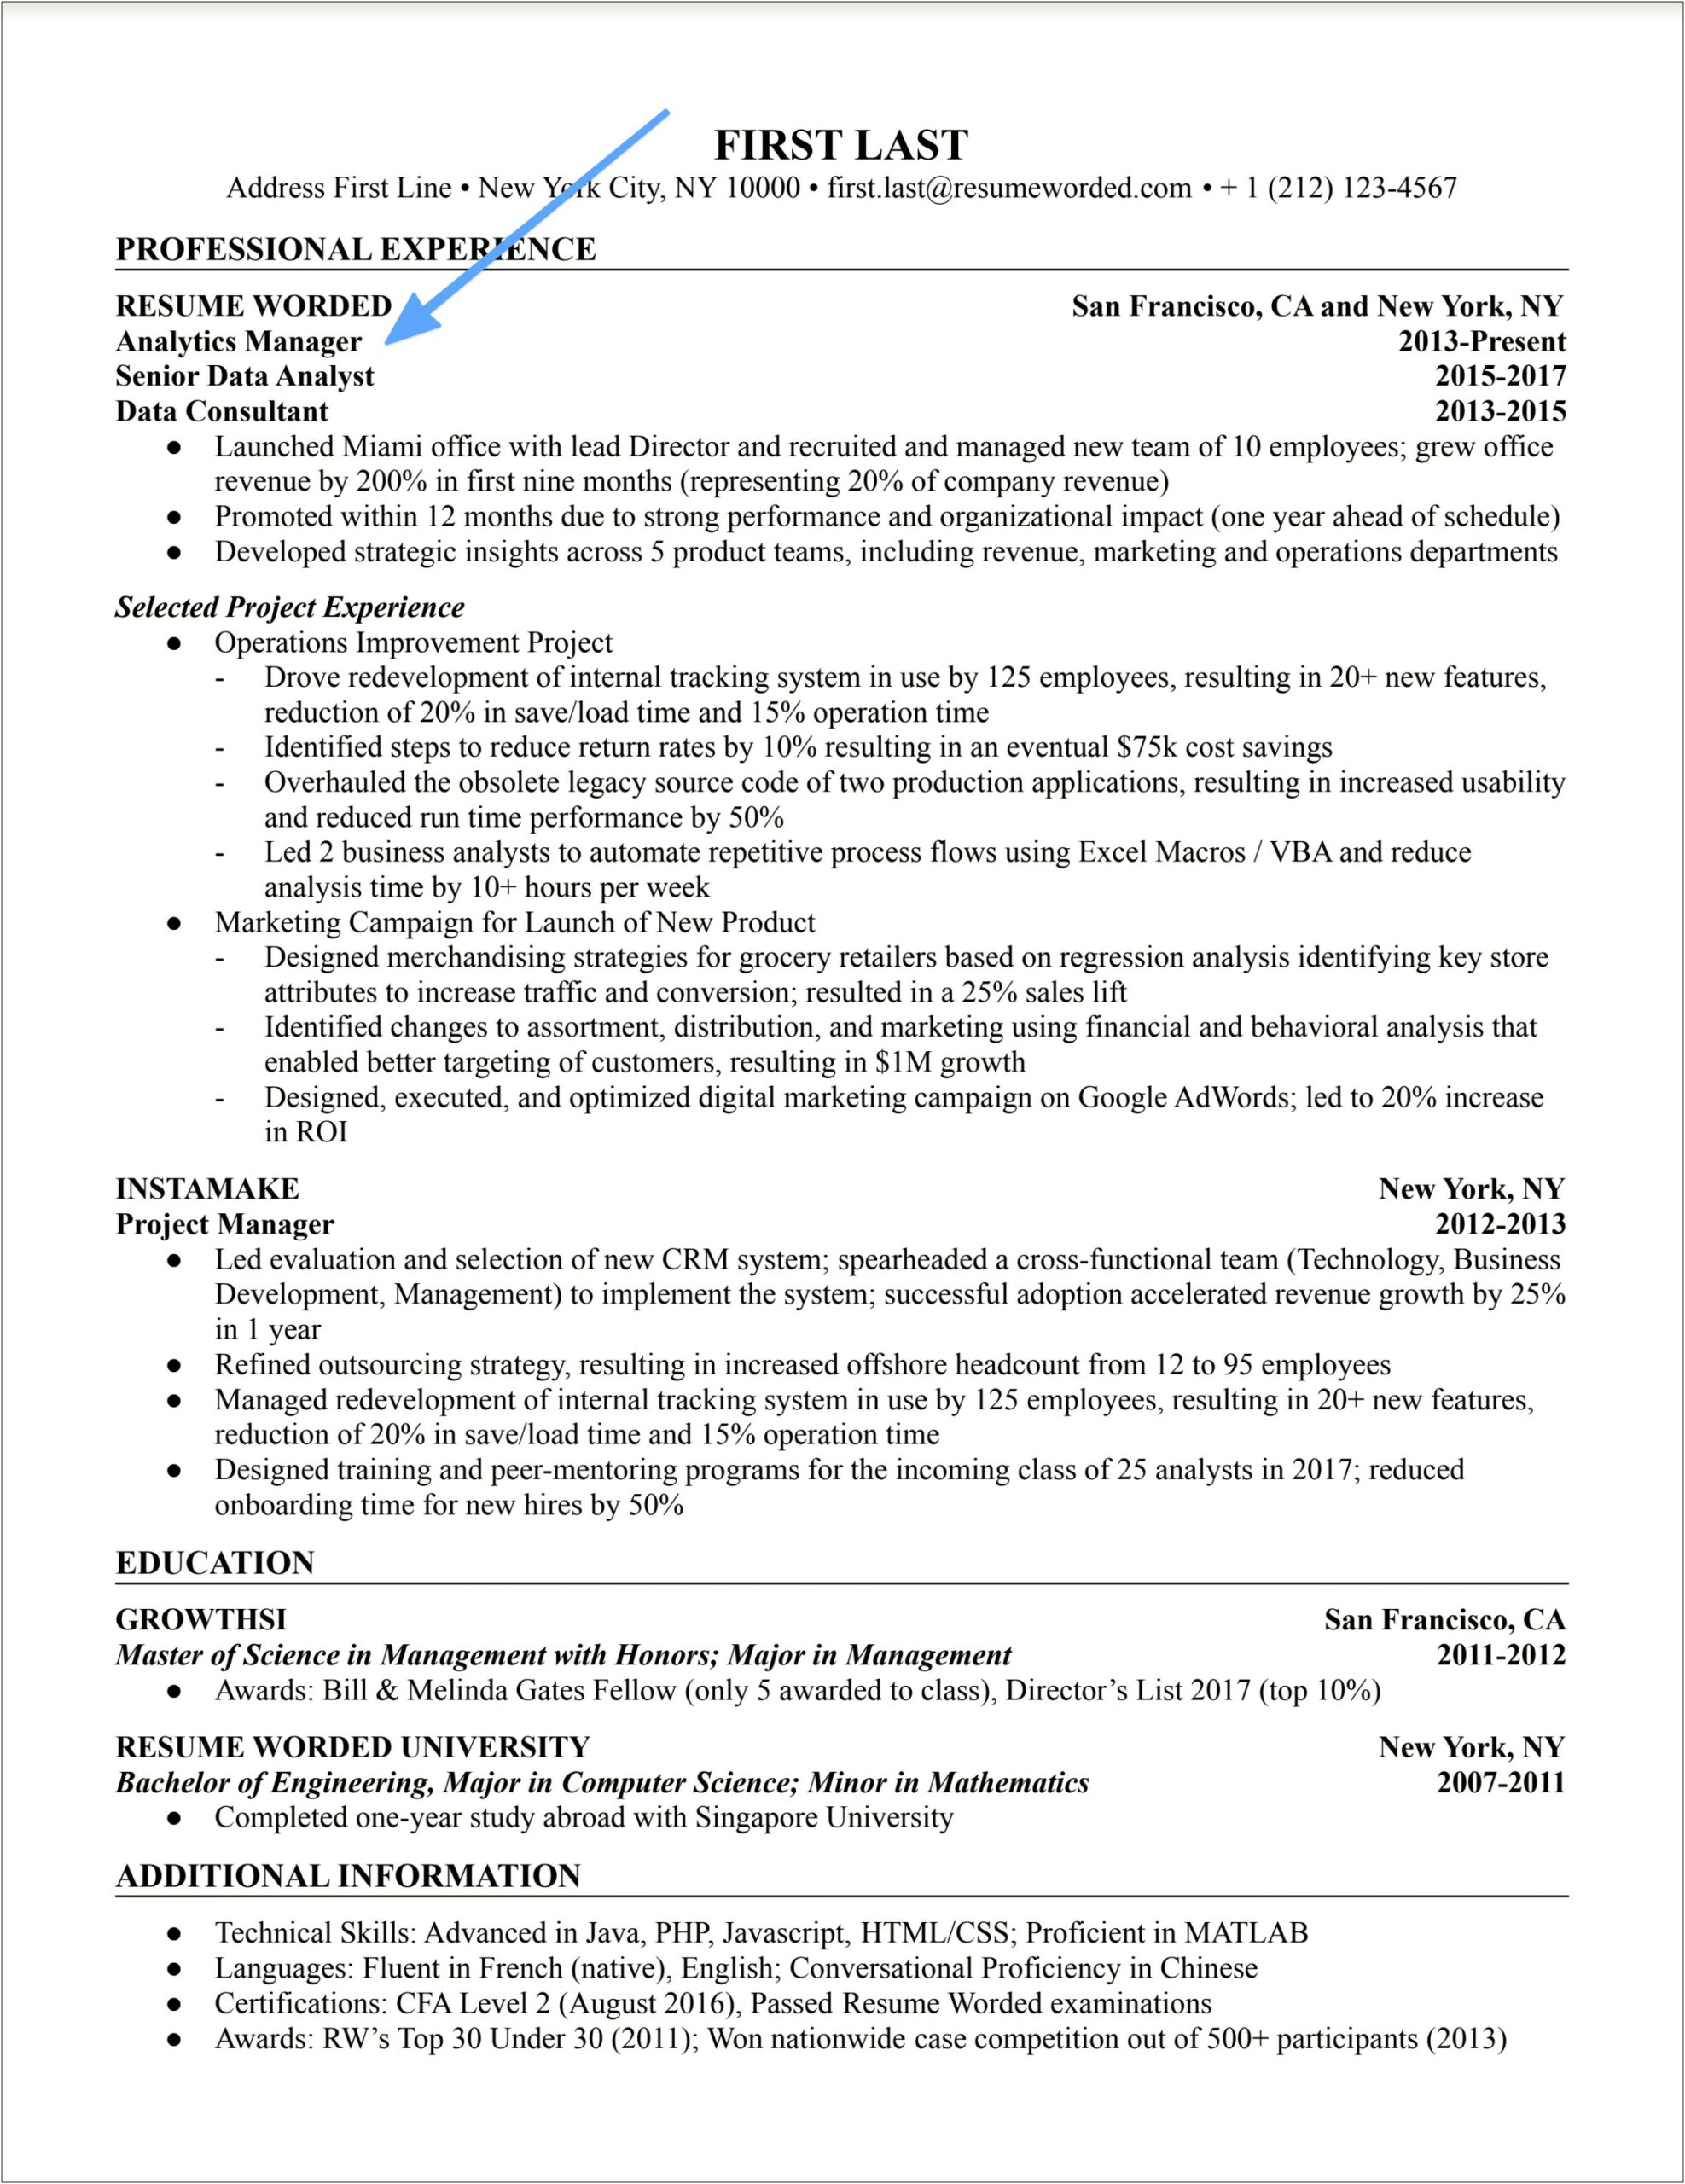 Residential Real Estate Analytics Manager Resumes